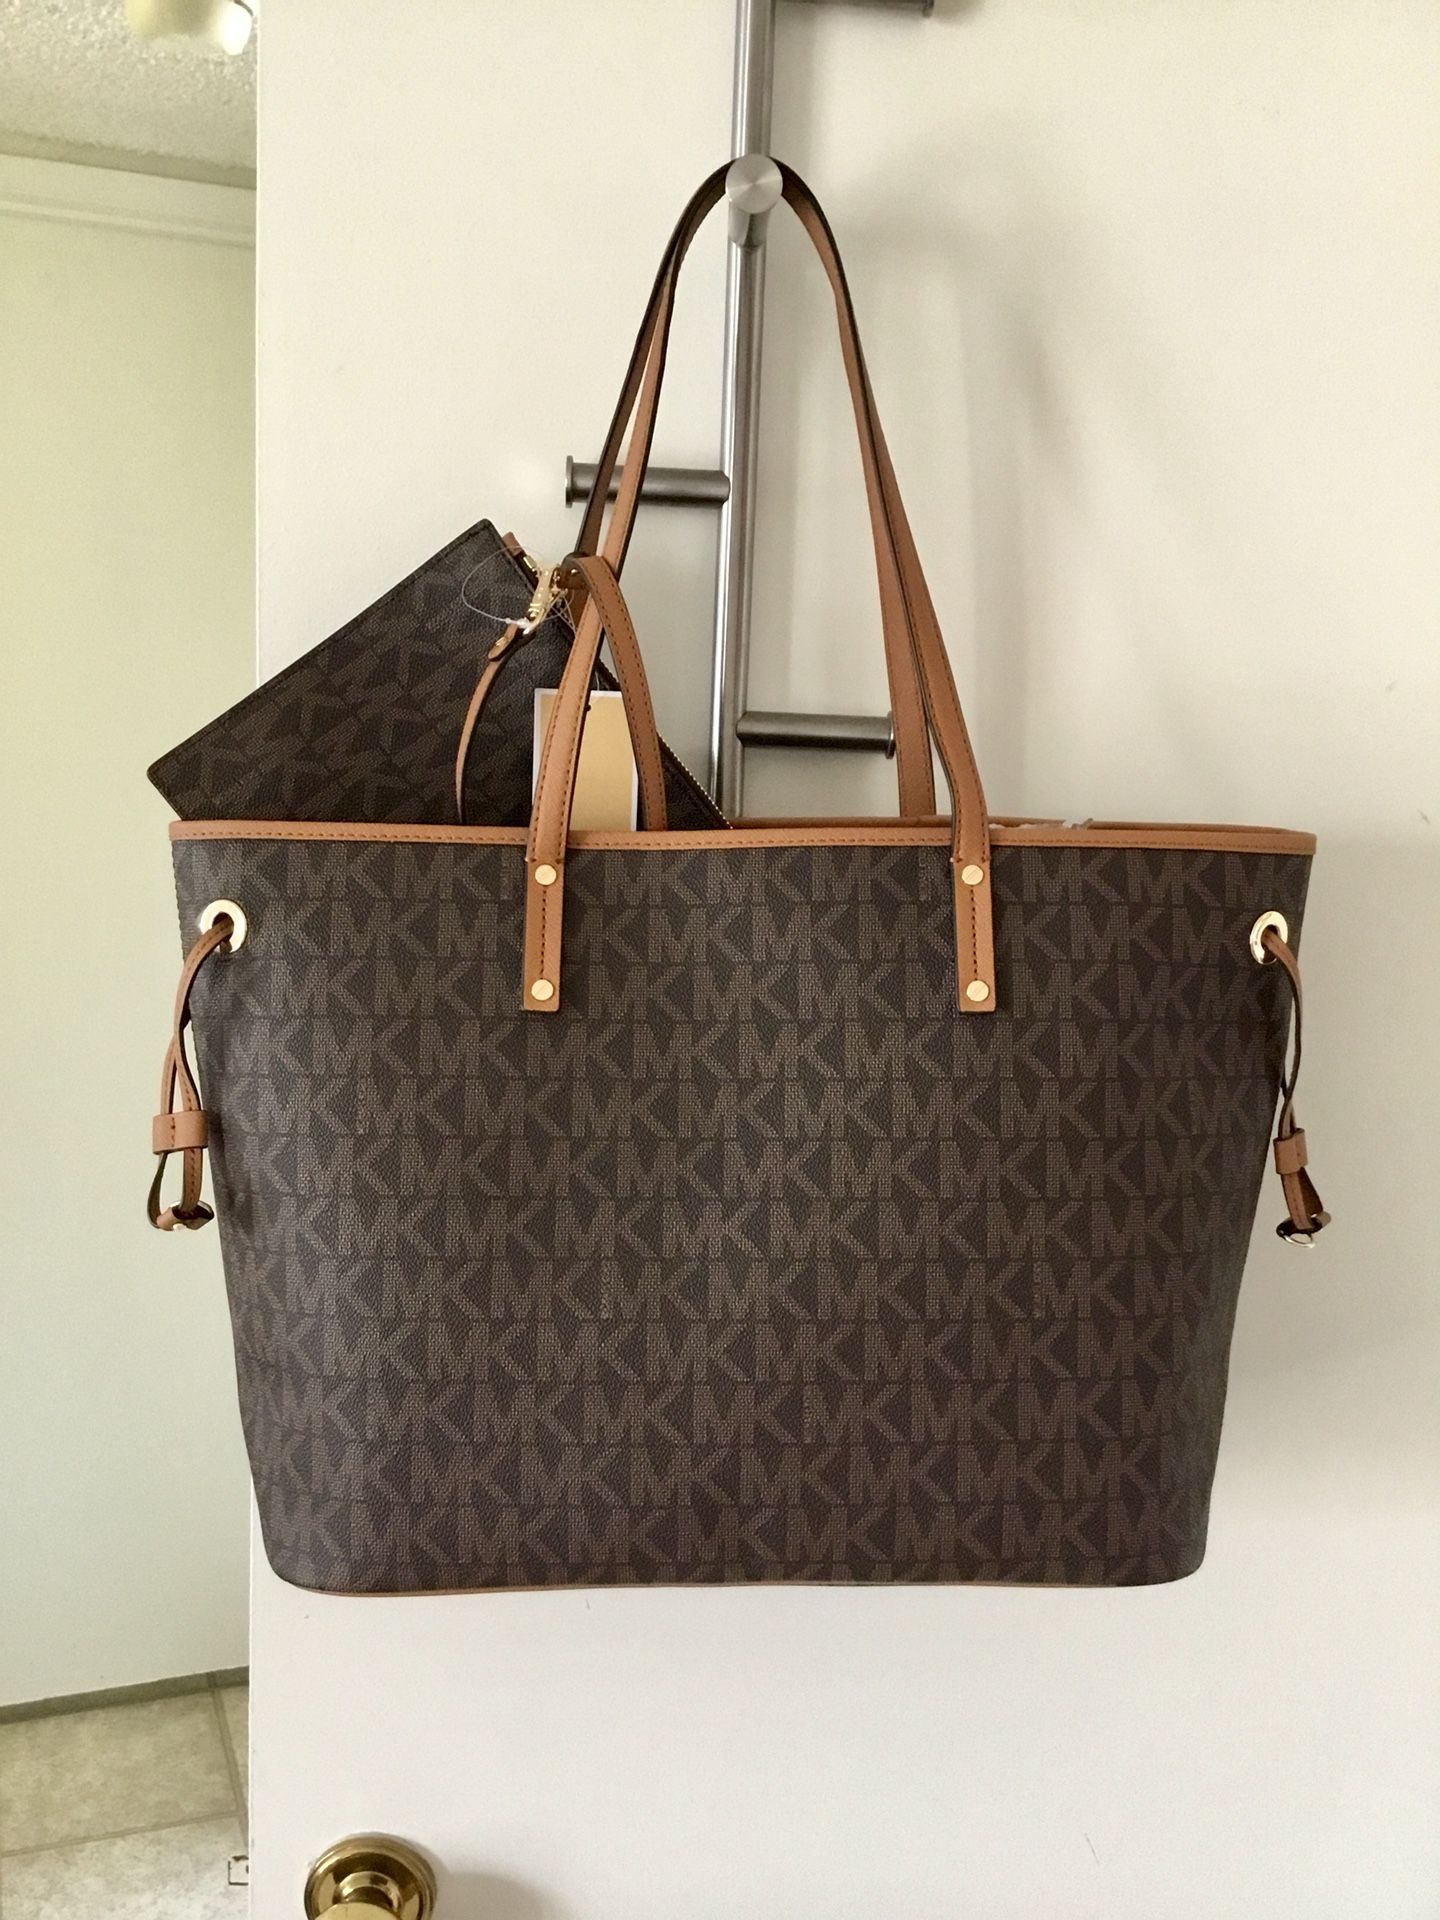 Michael Kors Black Jet Set Large Saffiano Leather Tote for Sale in Long  Beach, CA - OfferUp